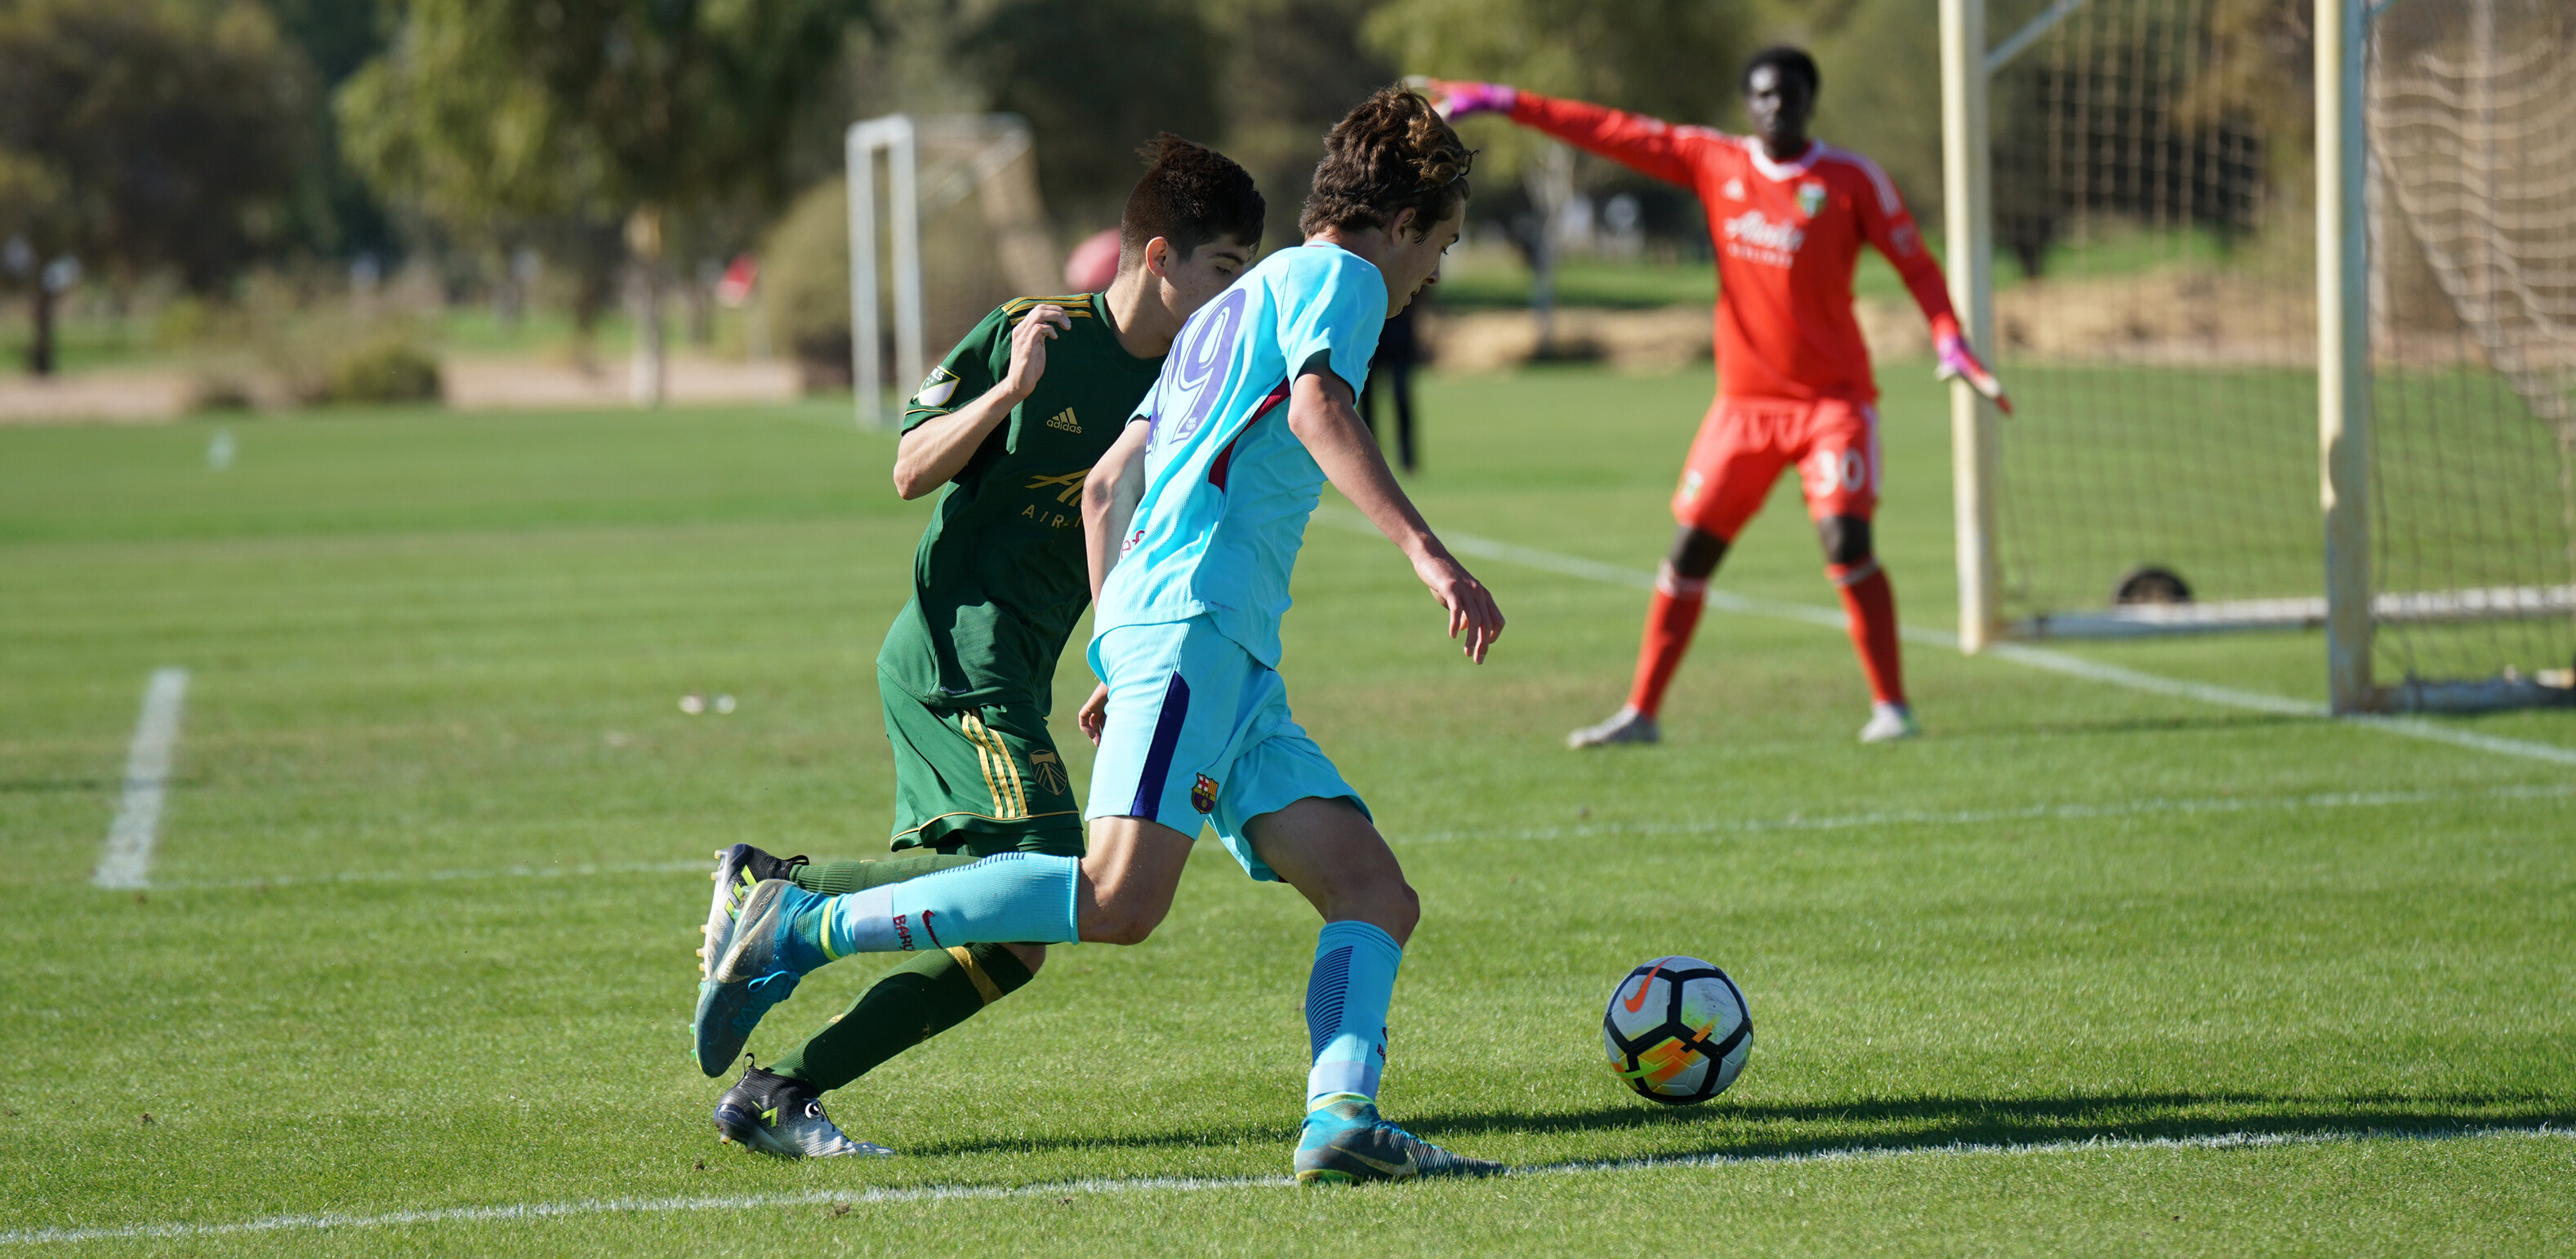 Barca Acadmey player, Austin Amer making a drive down the right line in an USSDA match